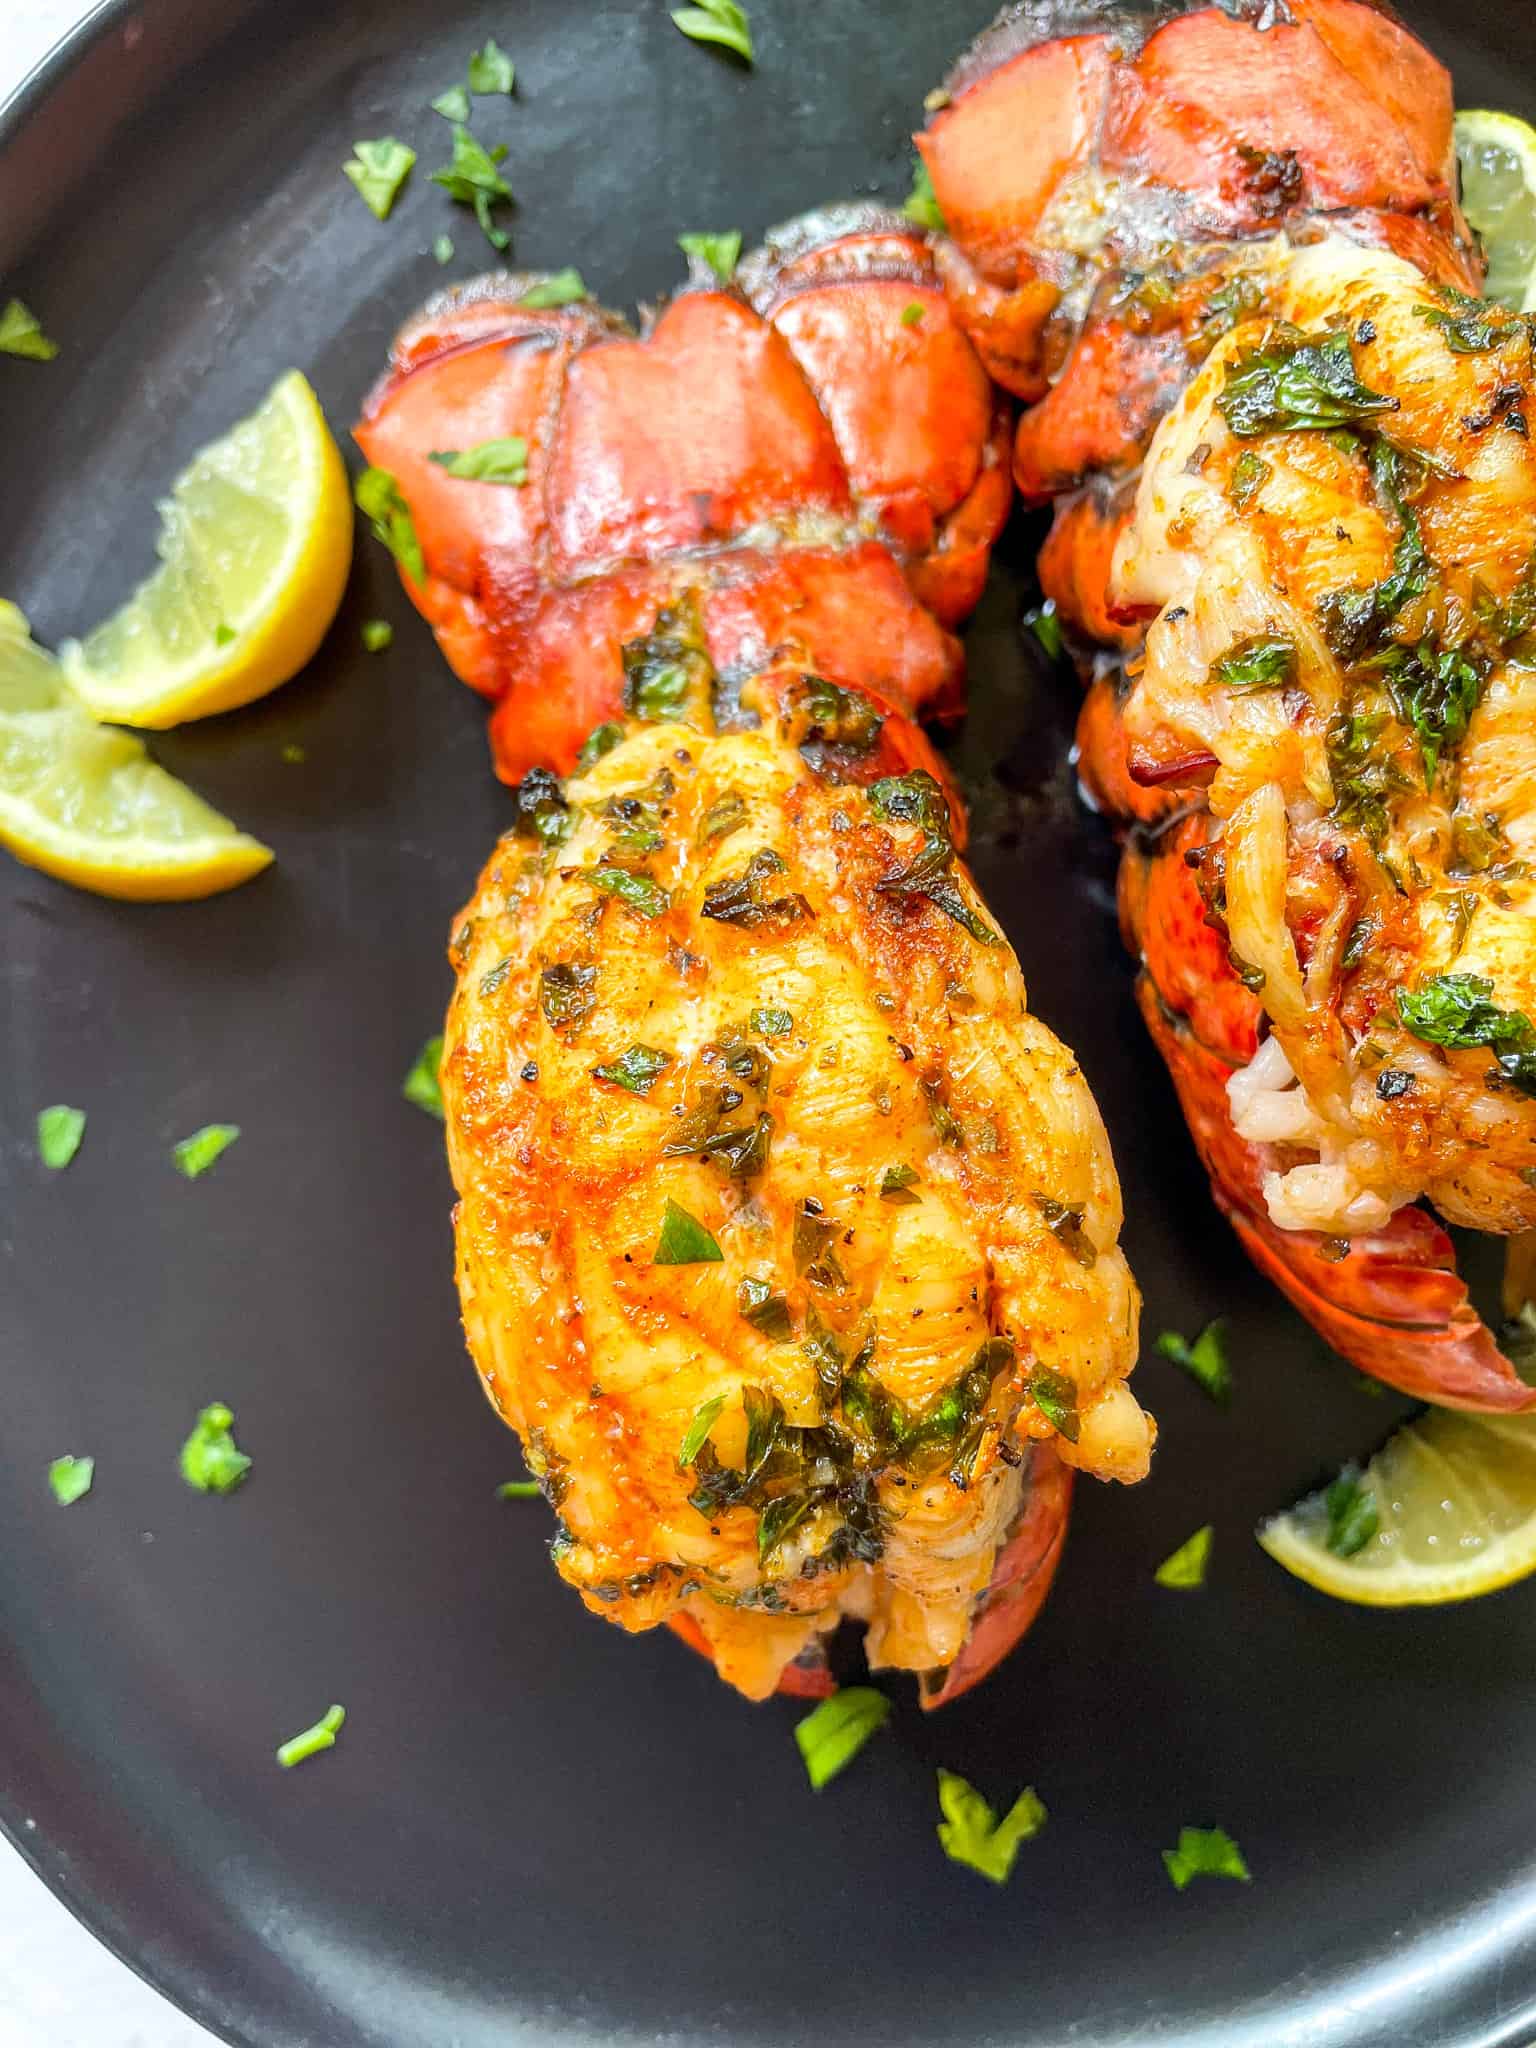 Air Fryer Lobster Tail with Lemon Garlic Butter